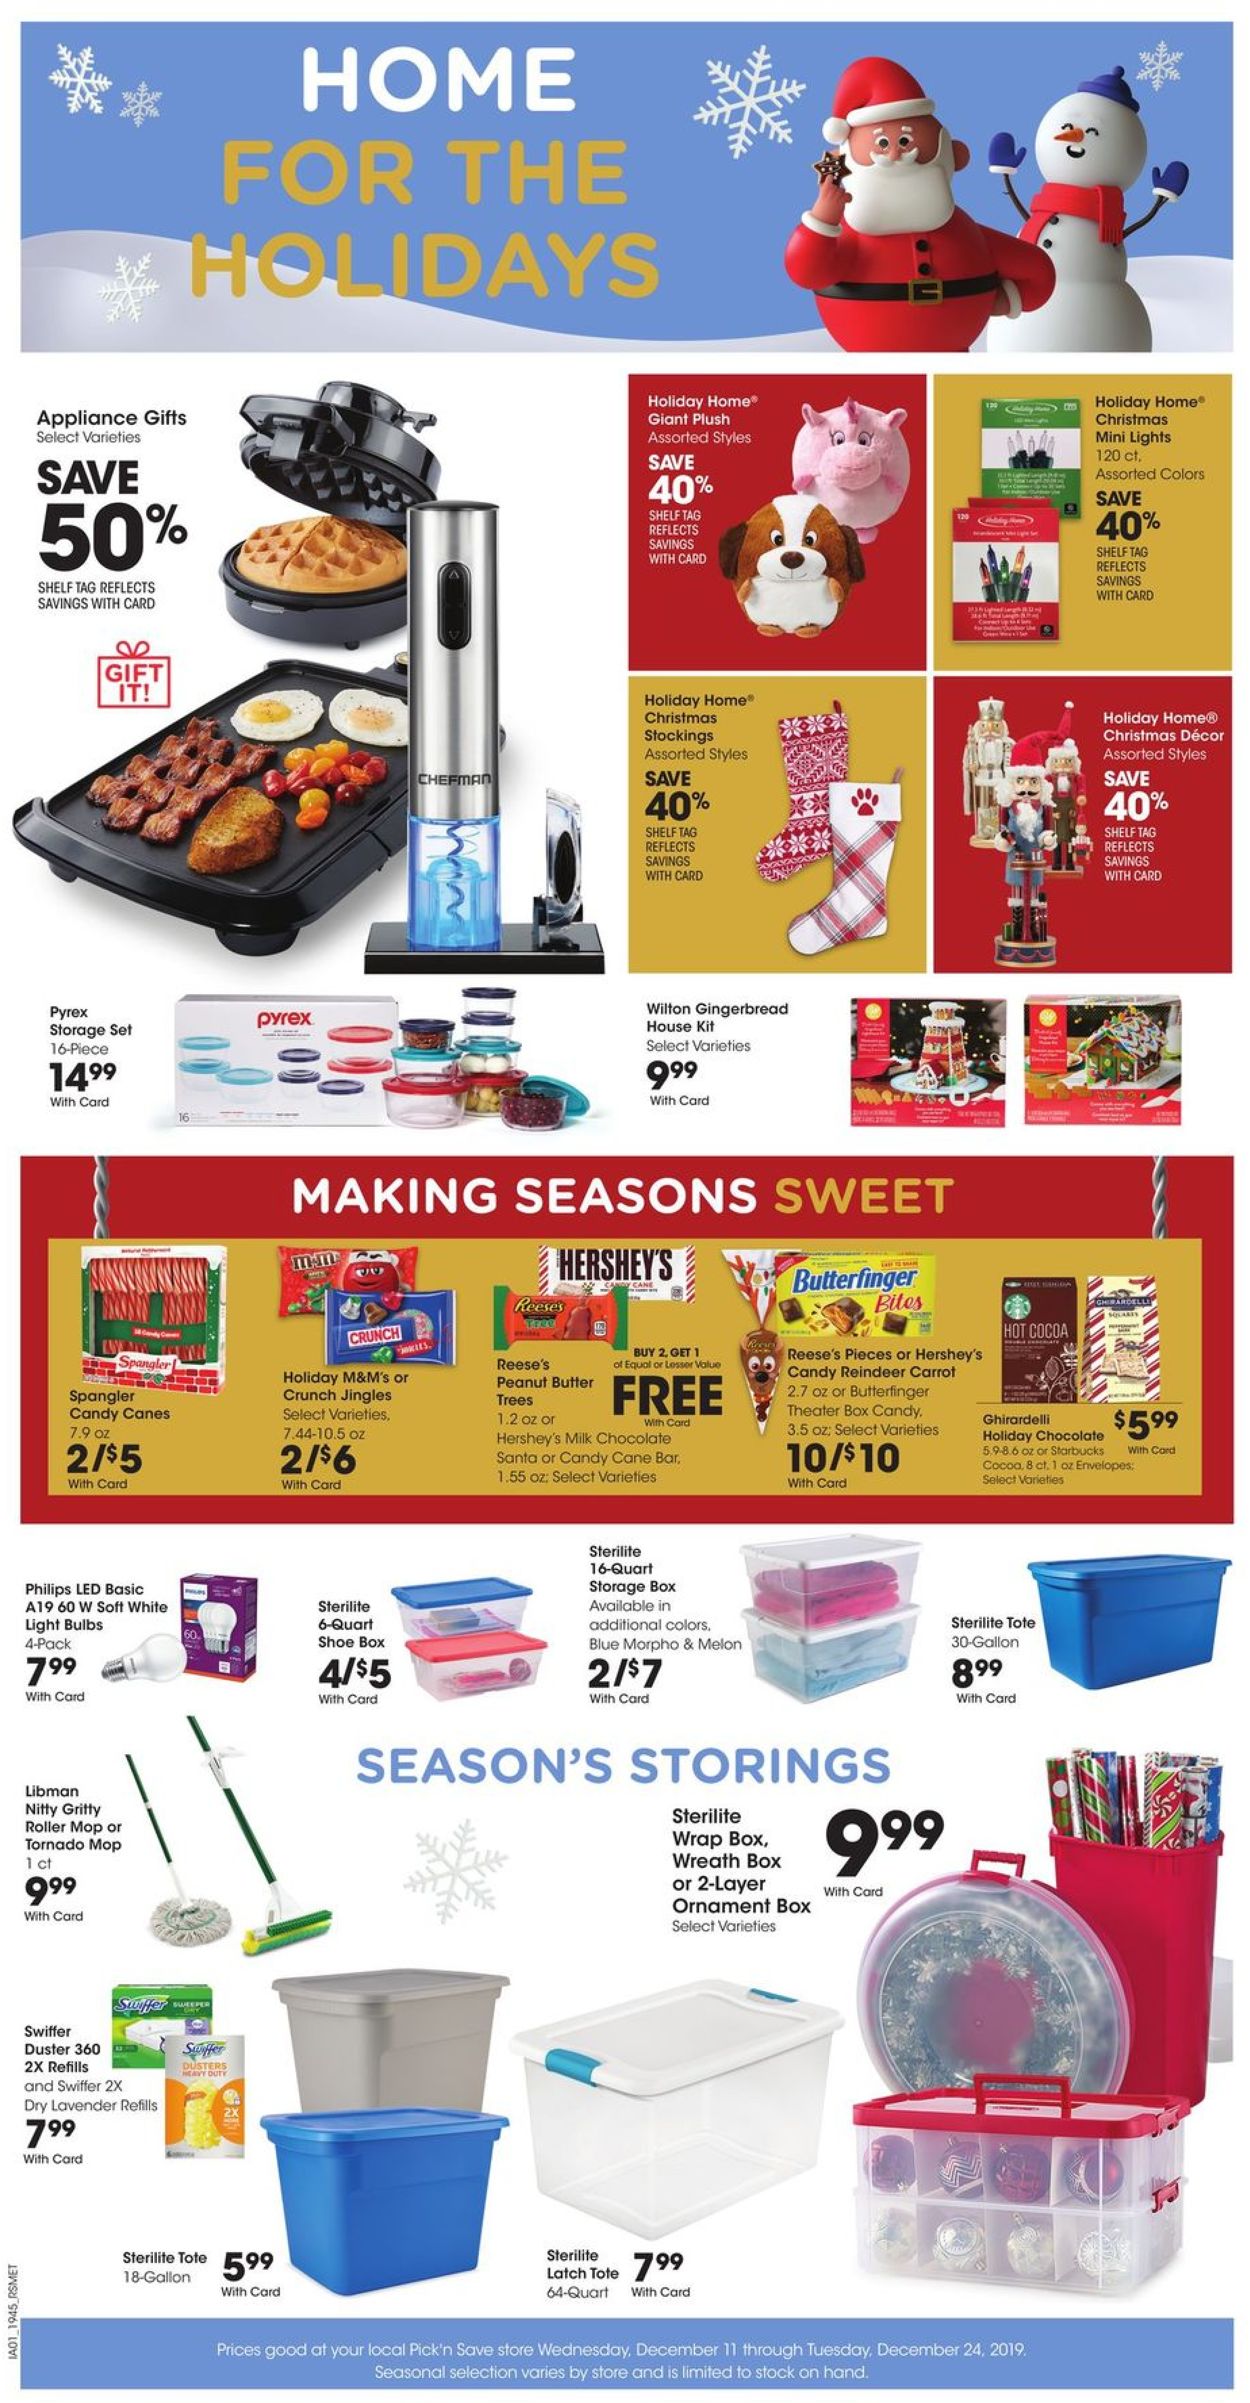 Pick ‘n Save Ad from 12/11/2019